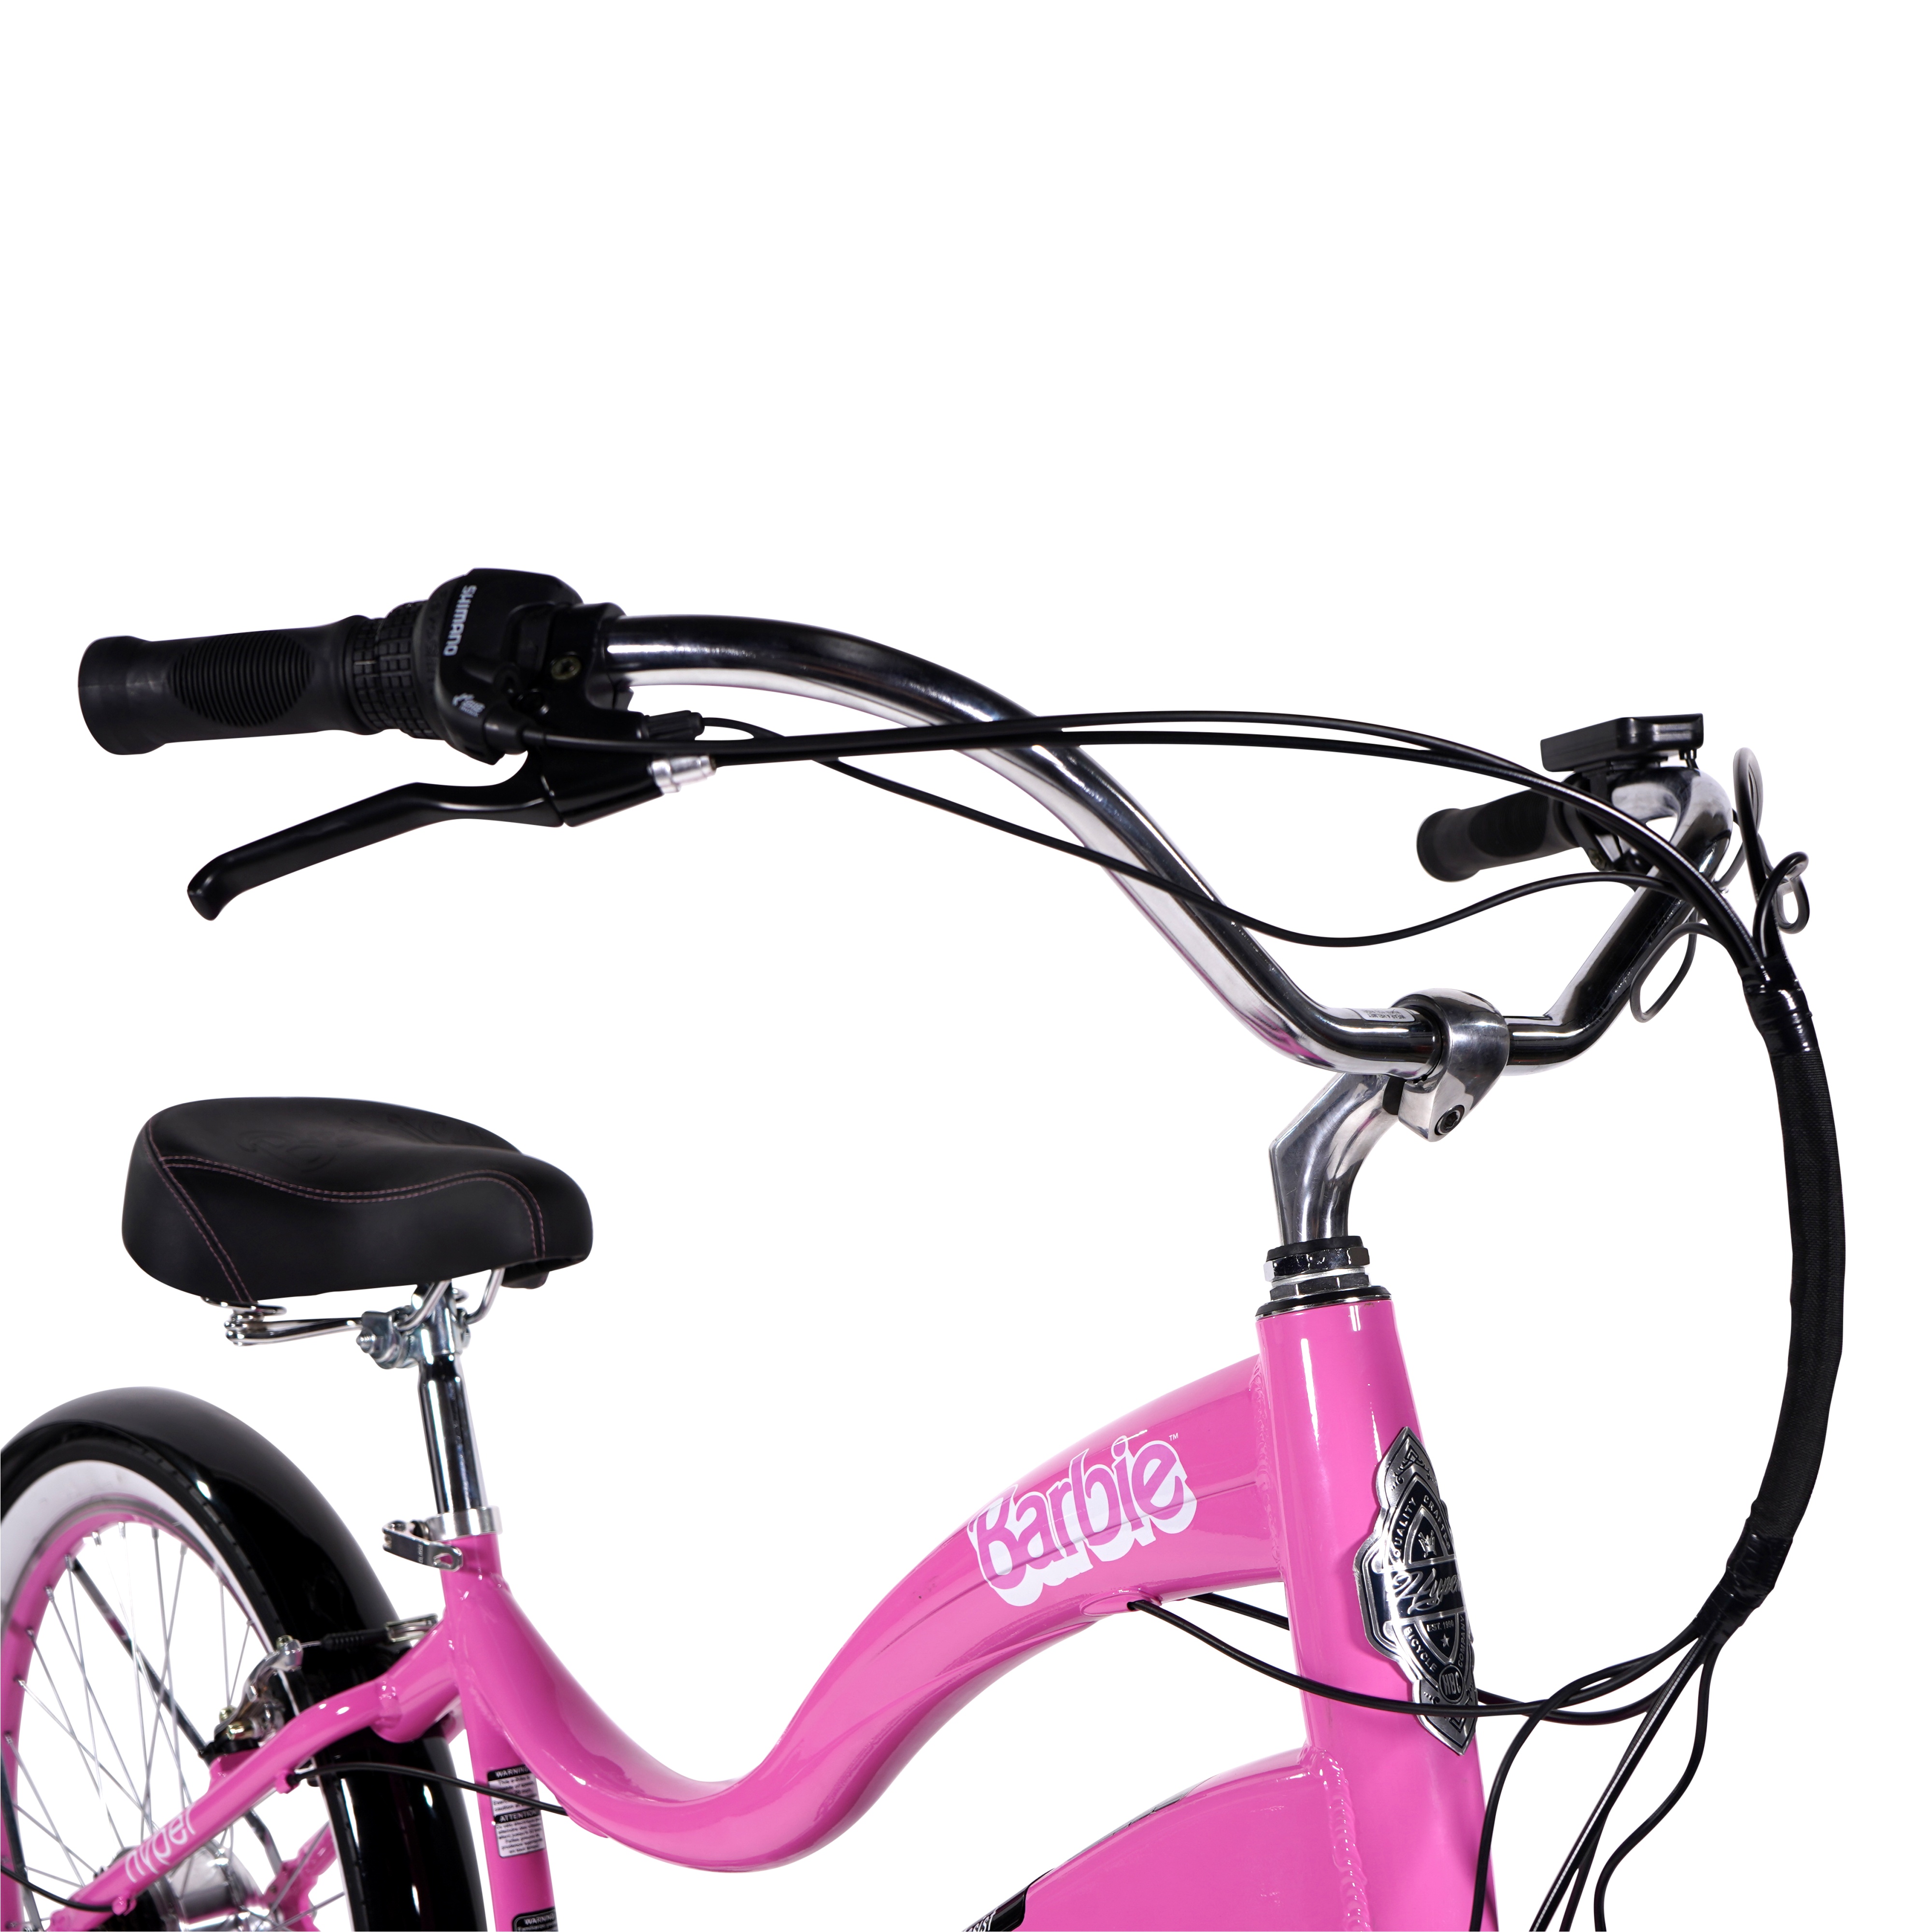 Hyper Bicycles Barbie 26" Ladies 36V Electric Cruiser E-Bike with Pedal-Assist, for adults, 250W Motor, Pink - image 5 of 13